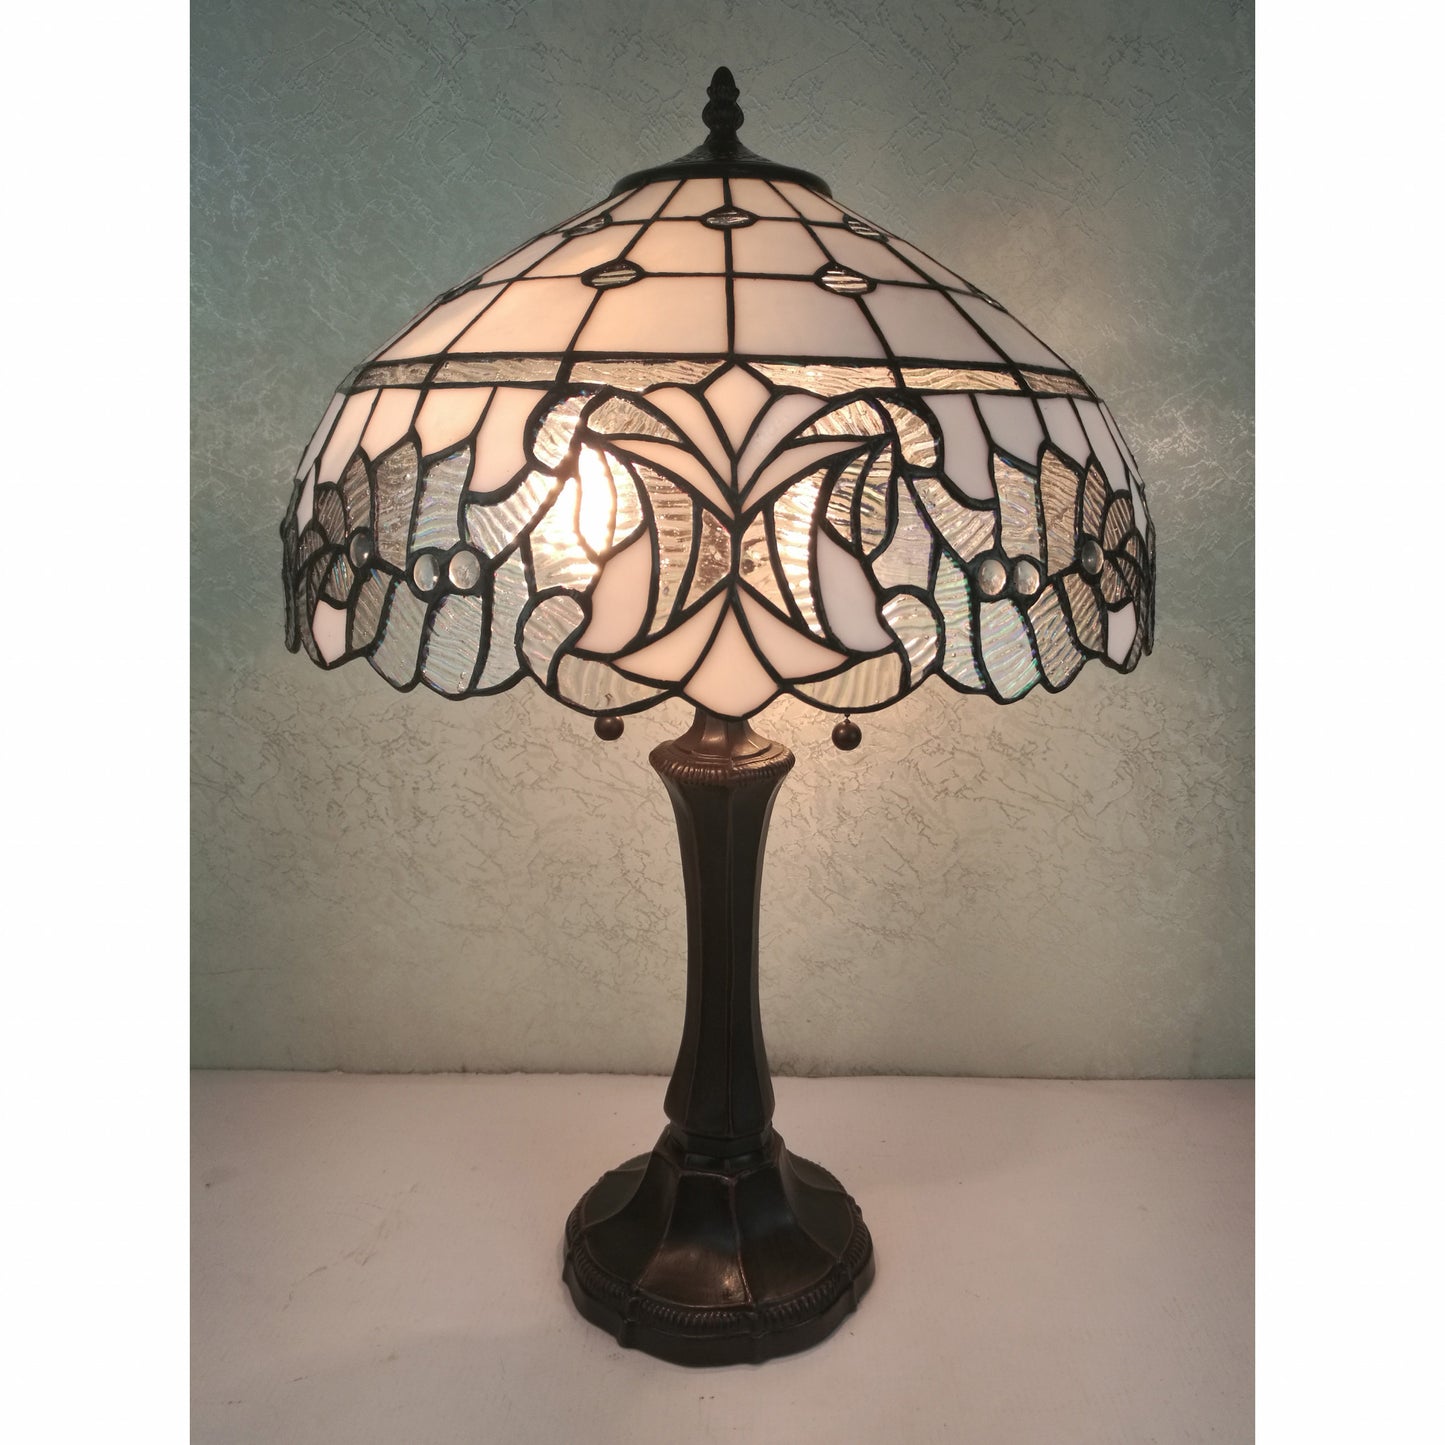 23" Stained Glass Two Light Vintage Antique Table Lamp